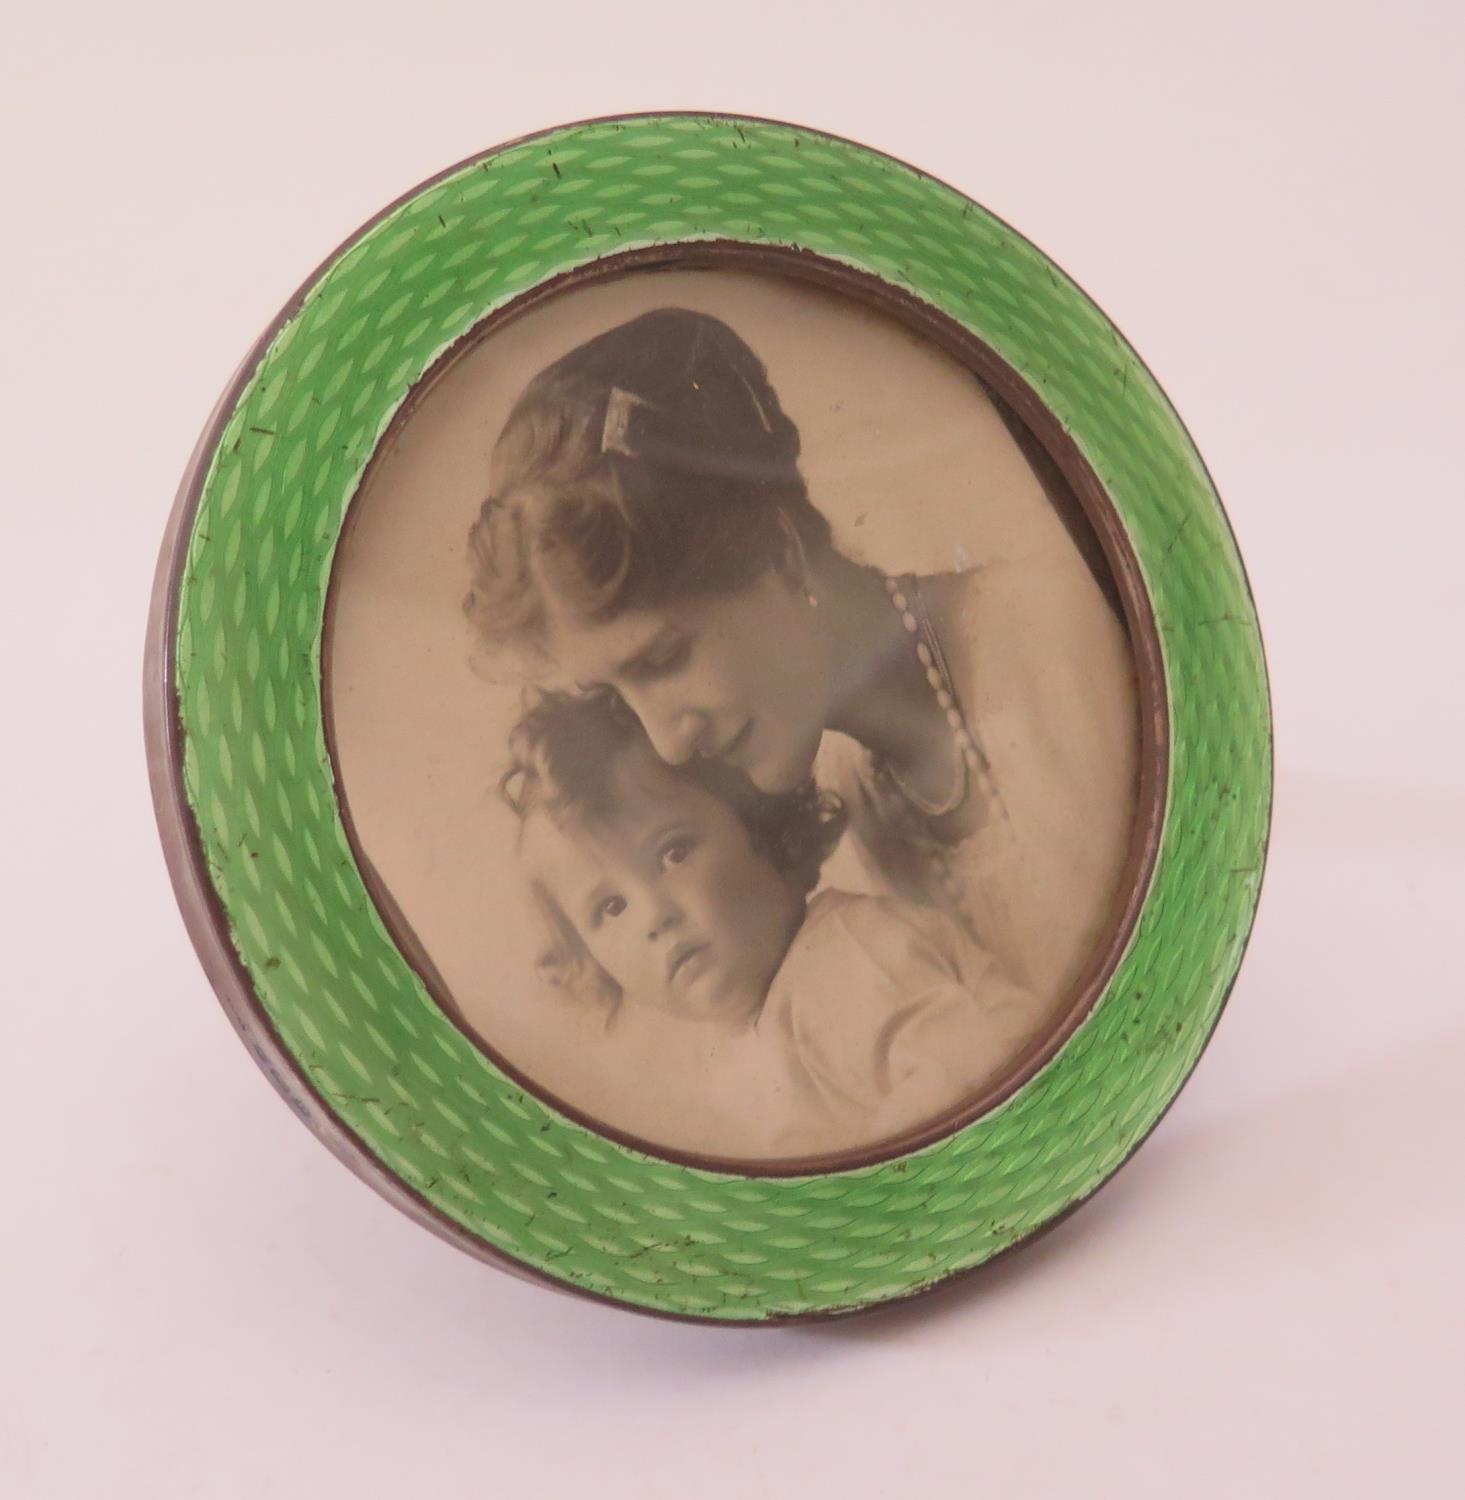 A George V Silver and Guilloché Enamel Circular Photograph Frame, 3 1/4in., Birmingham 1912, Henry